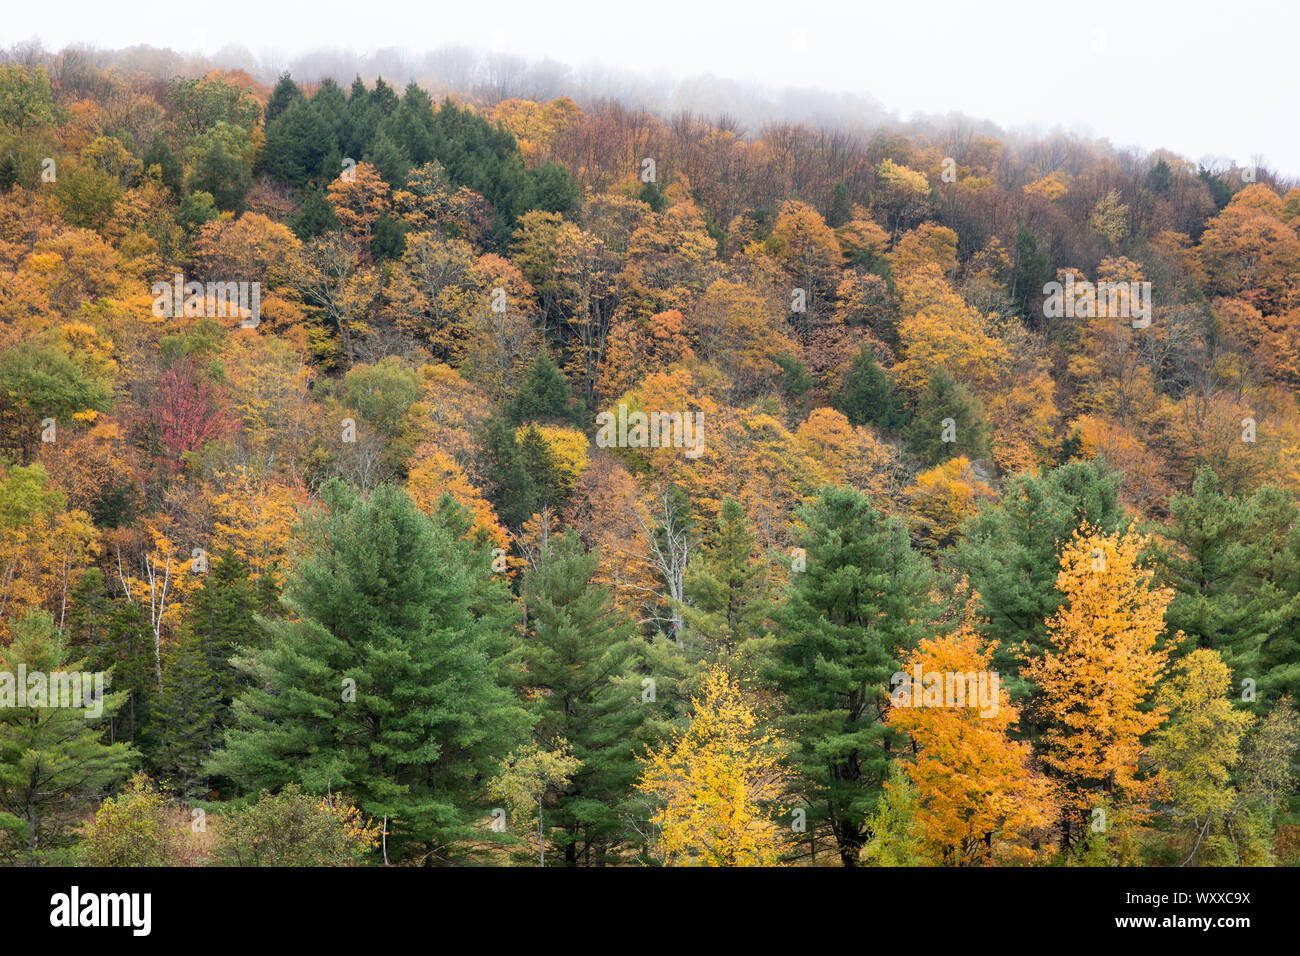 The Fall foliage colours of Maple, Aspen and Conifer trees  in Vermont, New England, USA Stock Photo